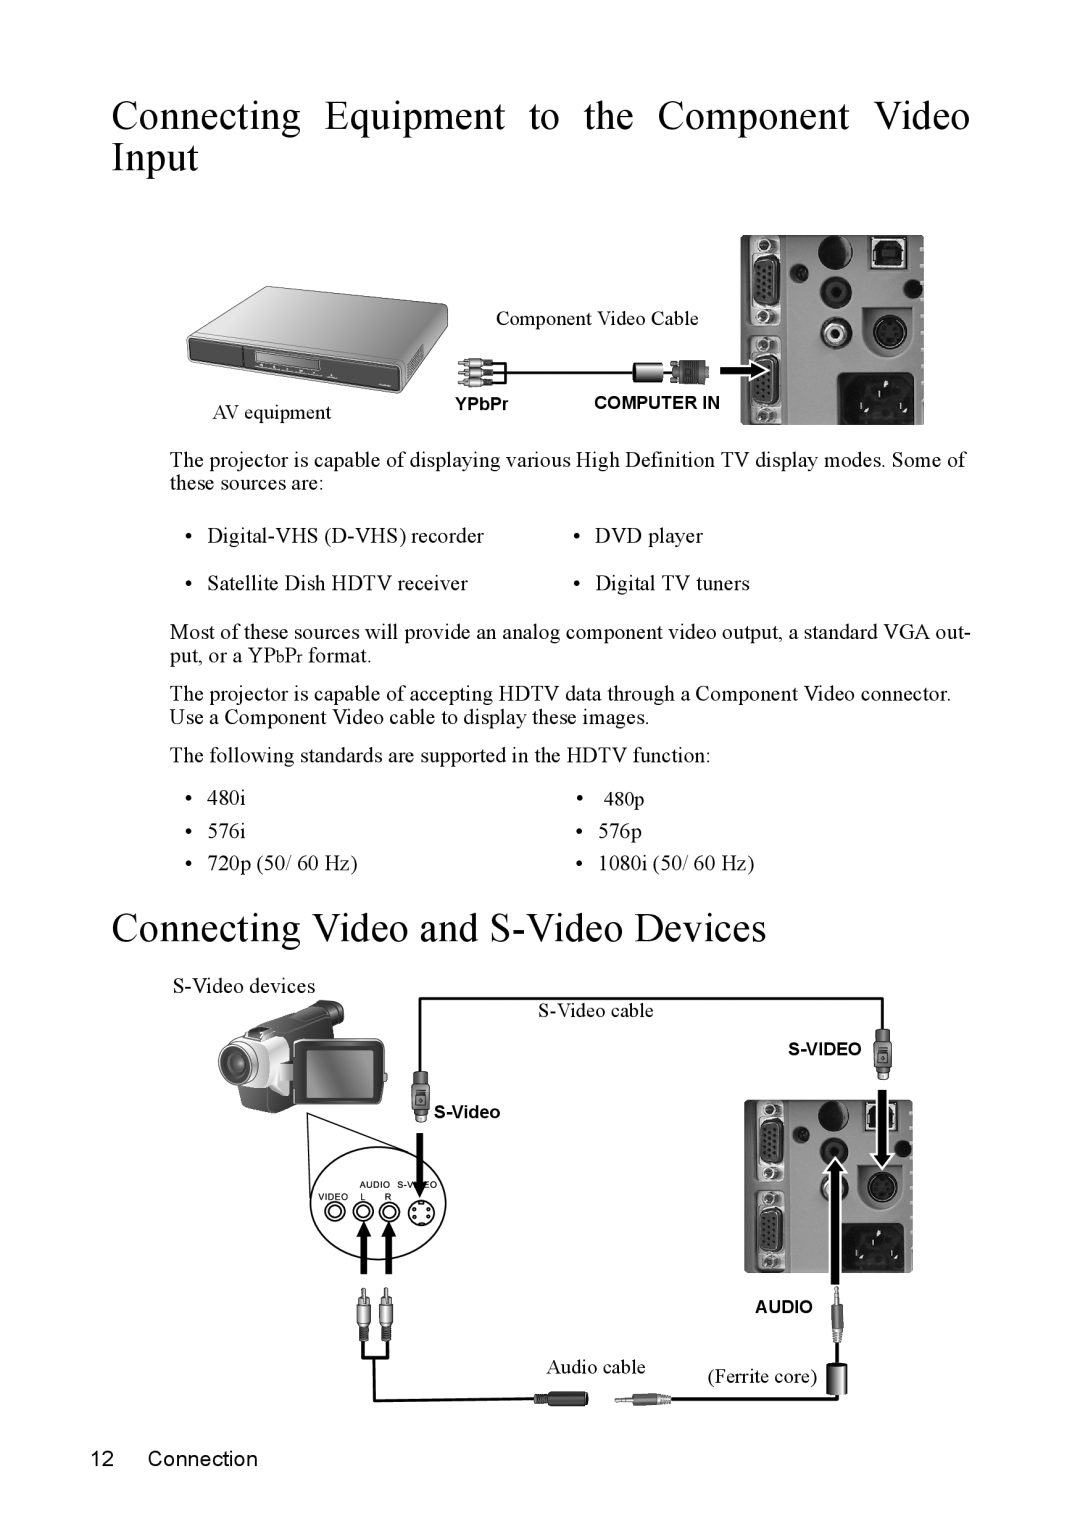 Mitsubishi Electronics SE2U Connecting Equipment to the Component Video Input, Connecting Video and S-Video Devices 